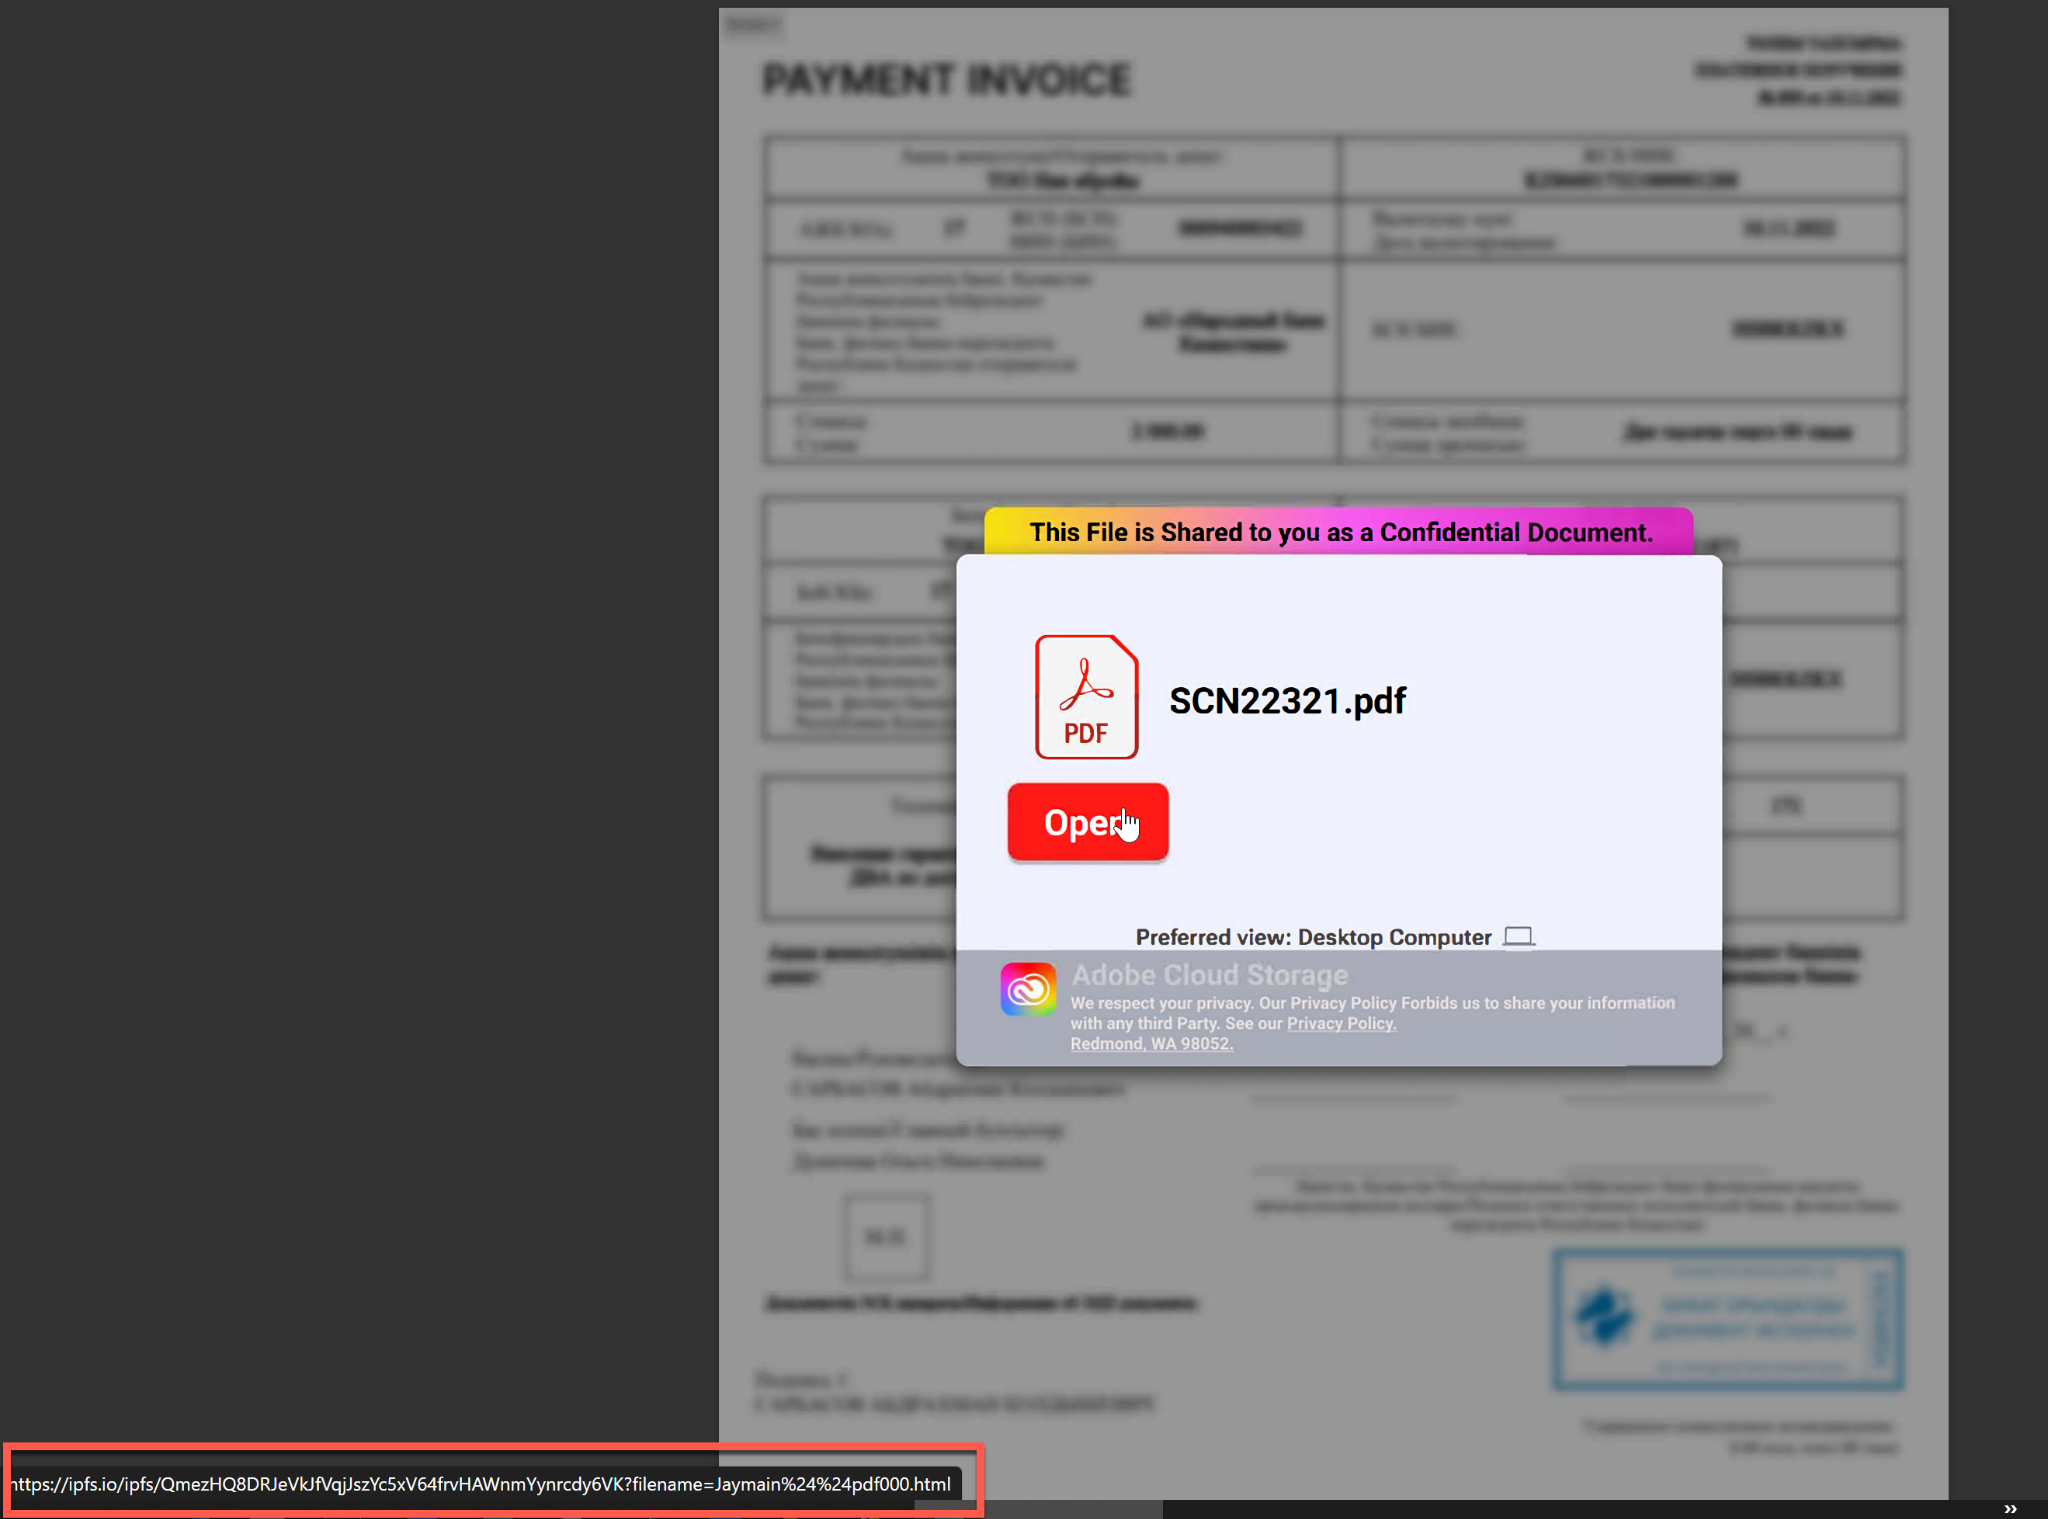 Image 9 is a screenshot of the attachment seen in the previous image of the DHL phishing lure. It shows a PDF as well as a red button saying open.